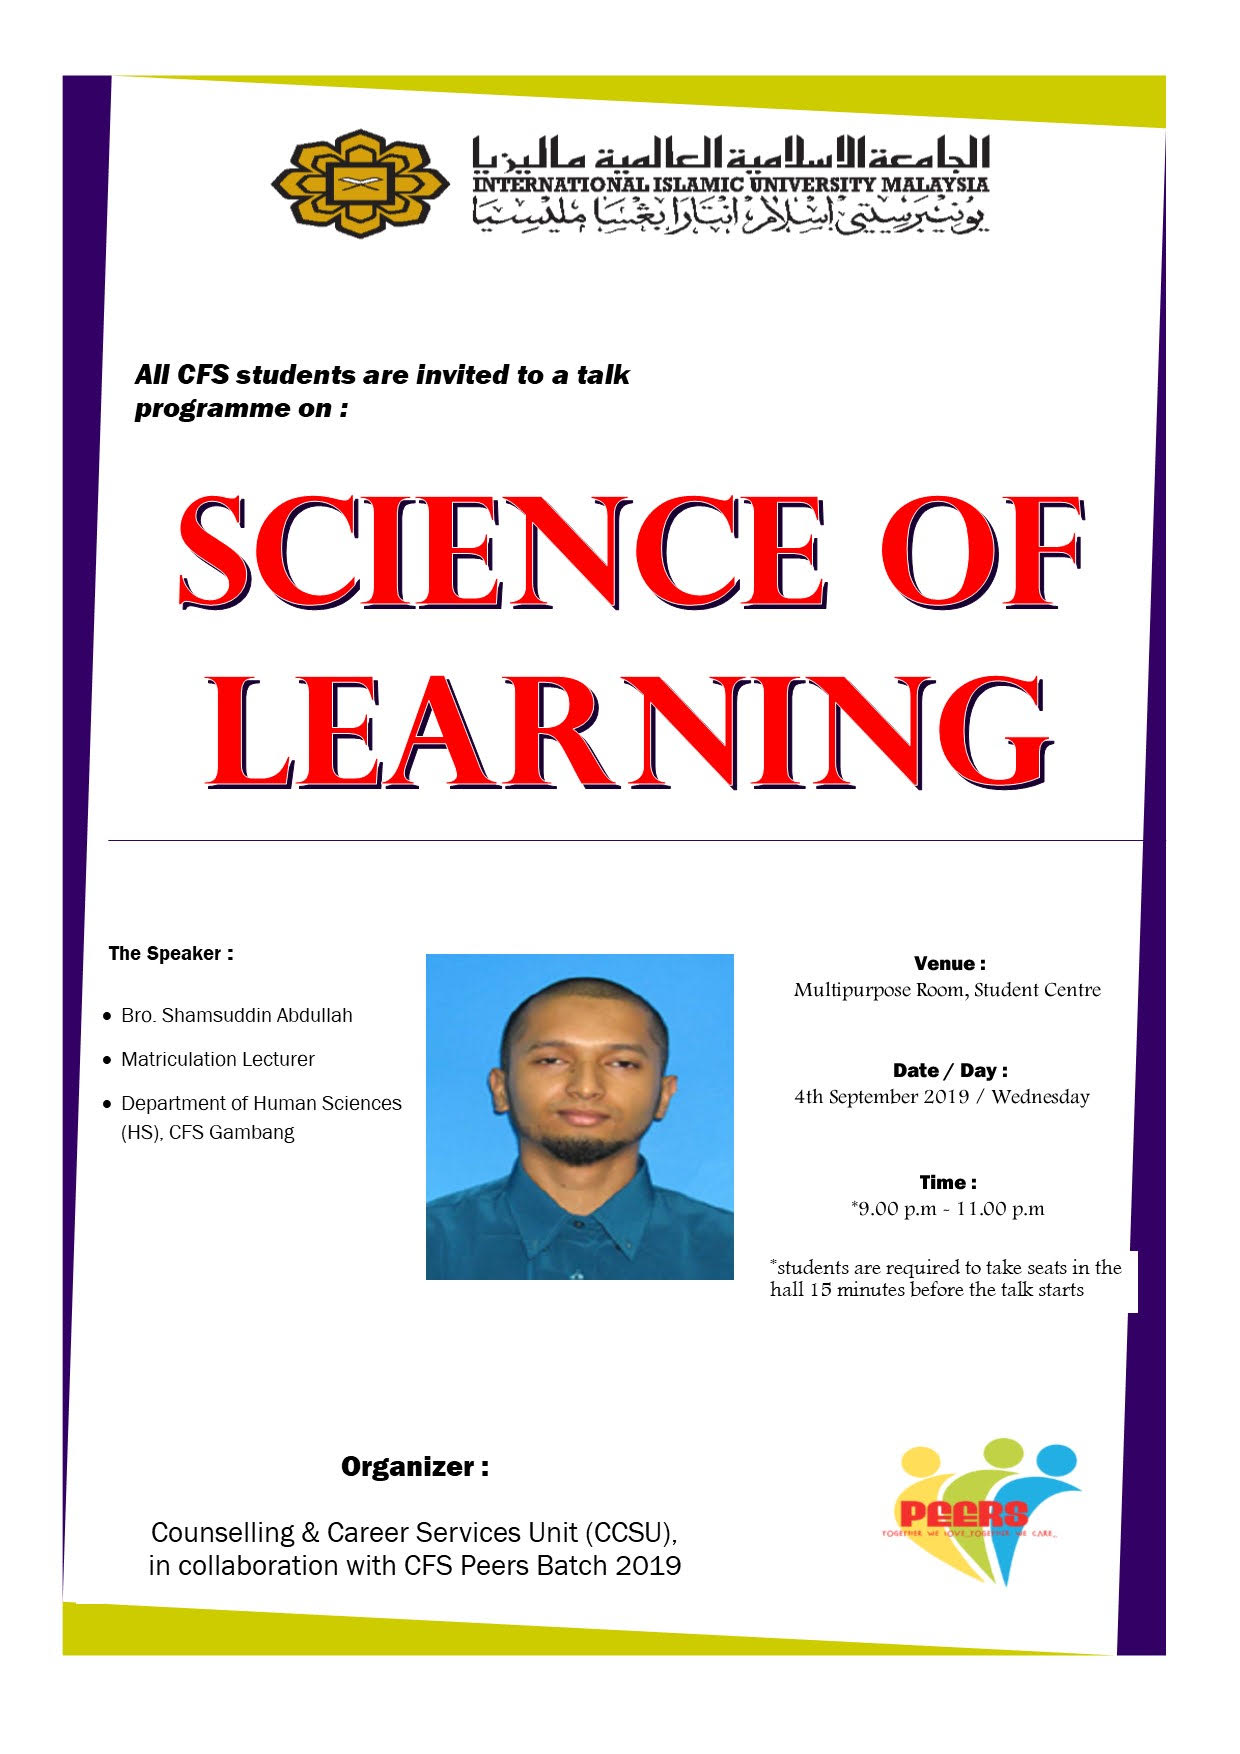 Talk Programme on Science of Learning